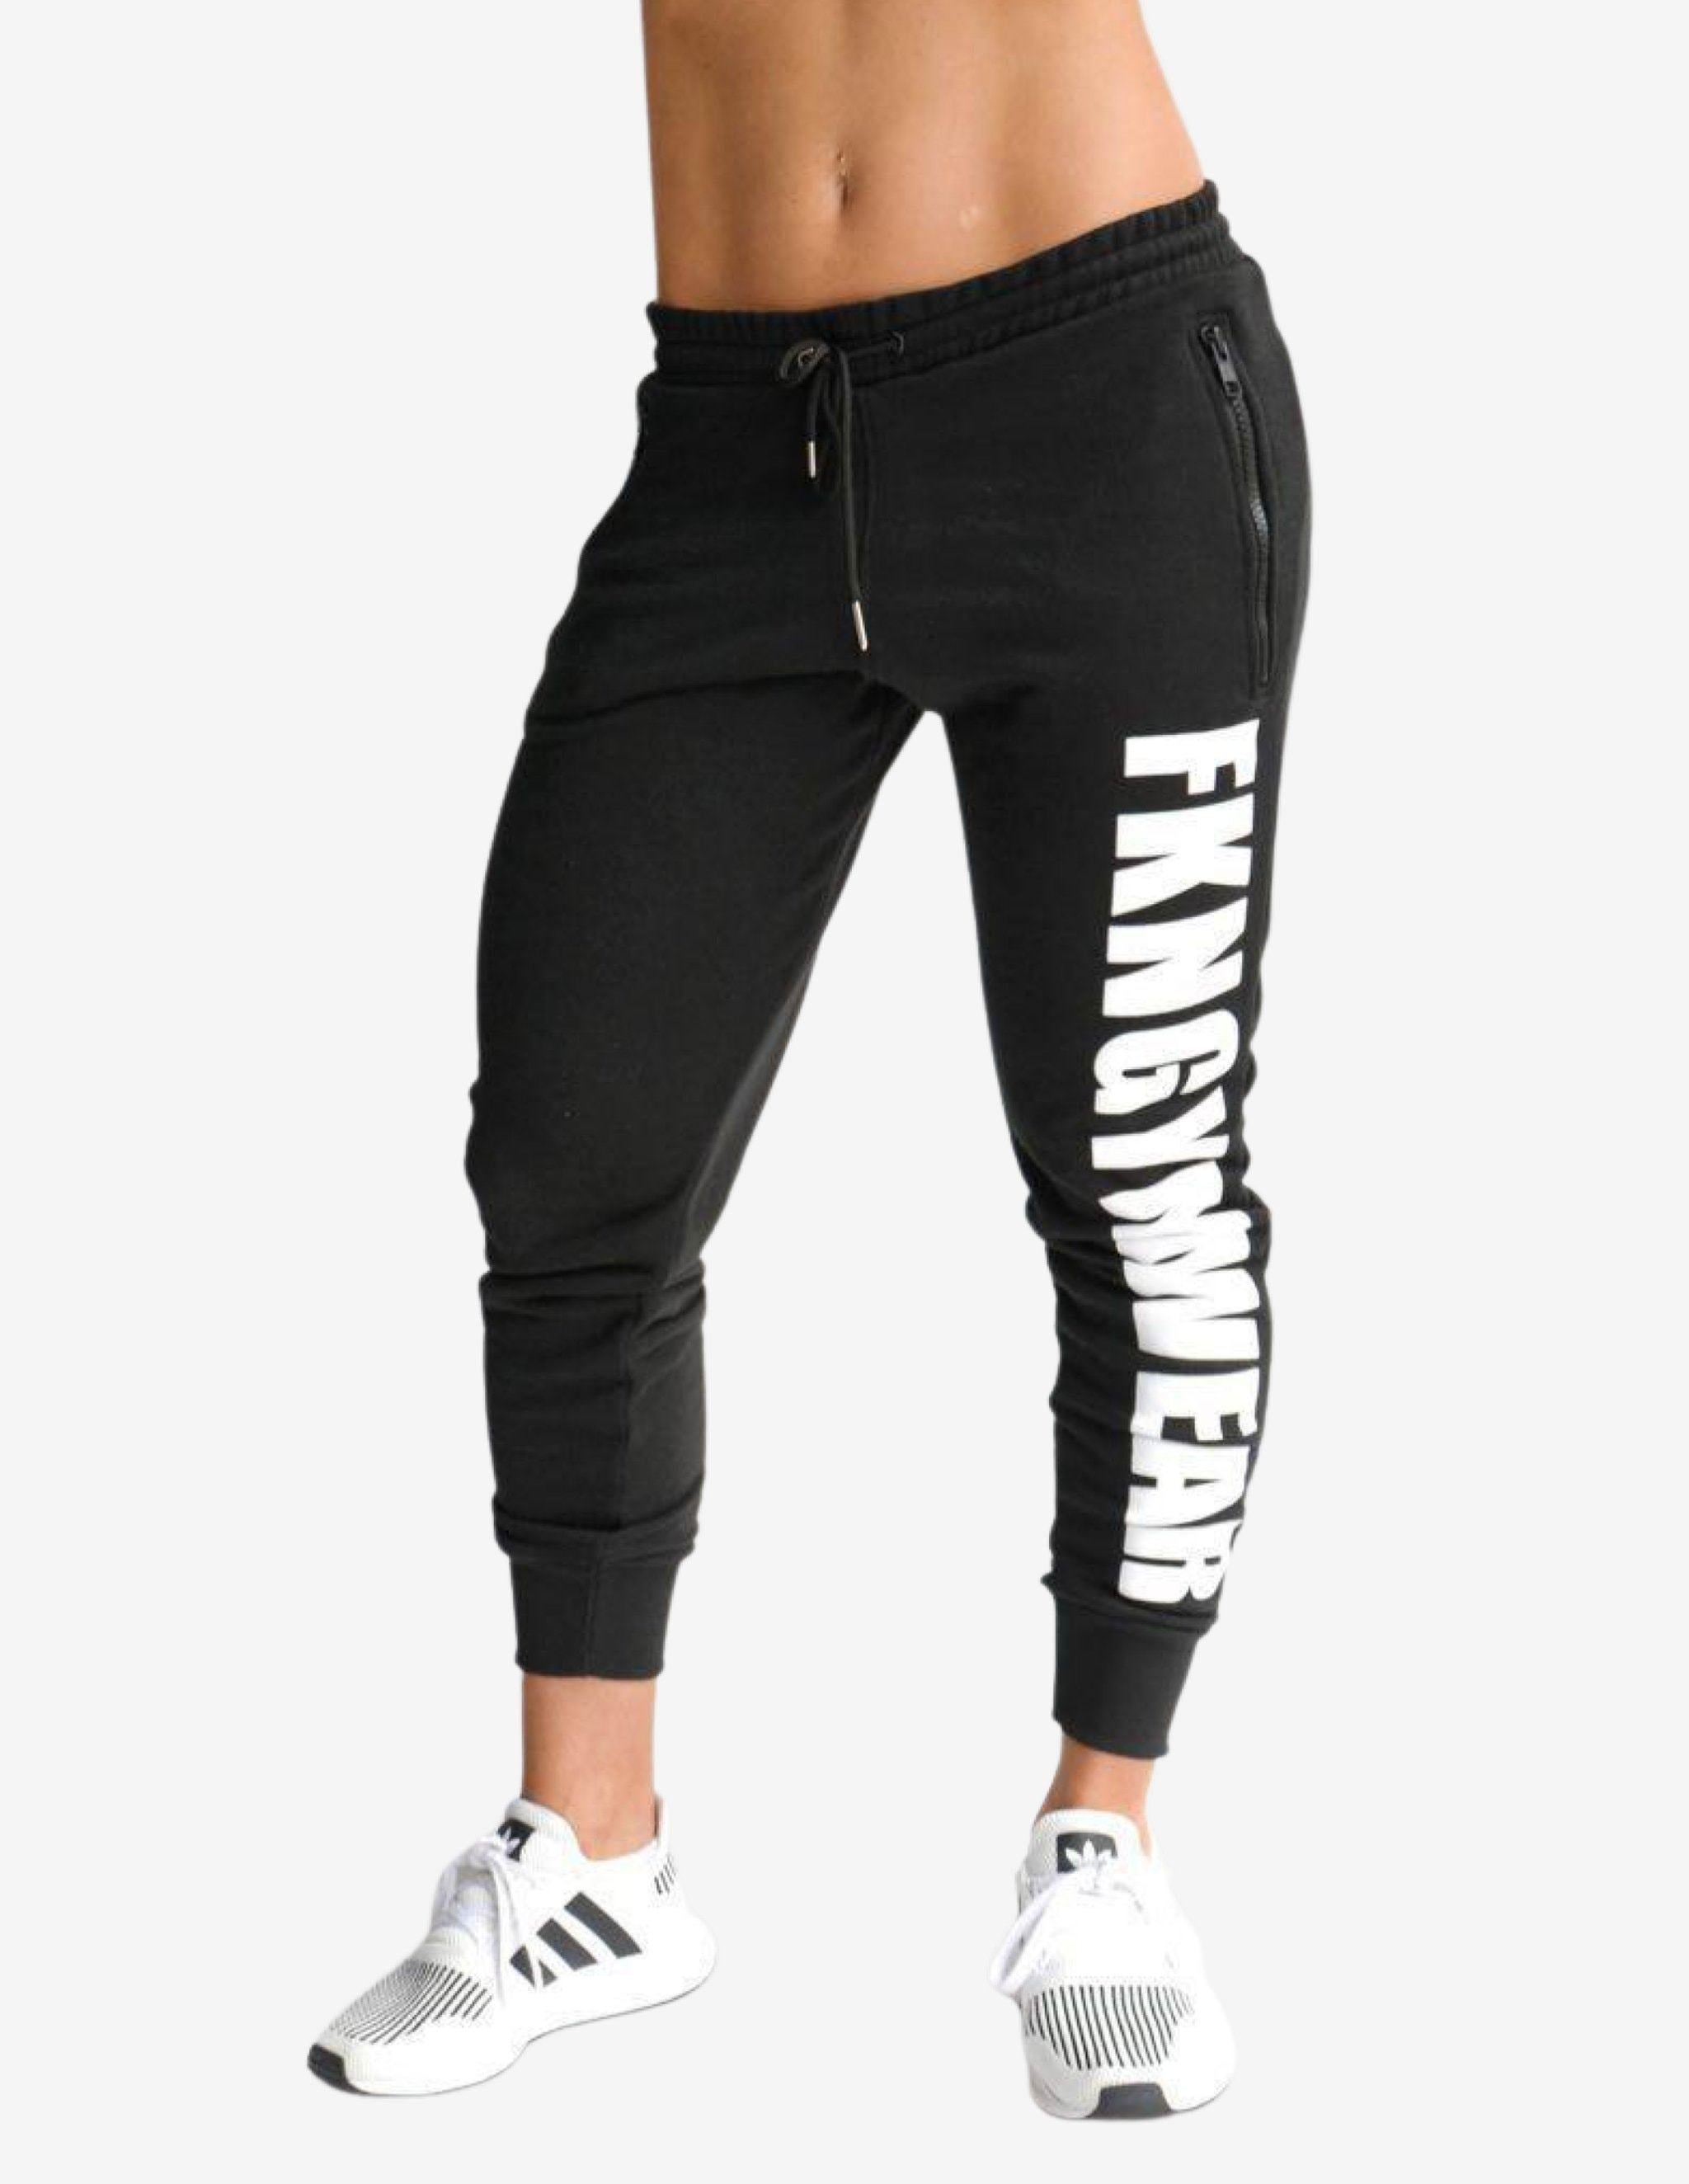 mYURA Printed Black Track Pants for Women, Women's Gym Wear Tights, Ideal  for Yoga, Workout & Gym Pants for Women